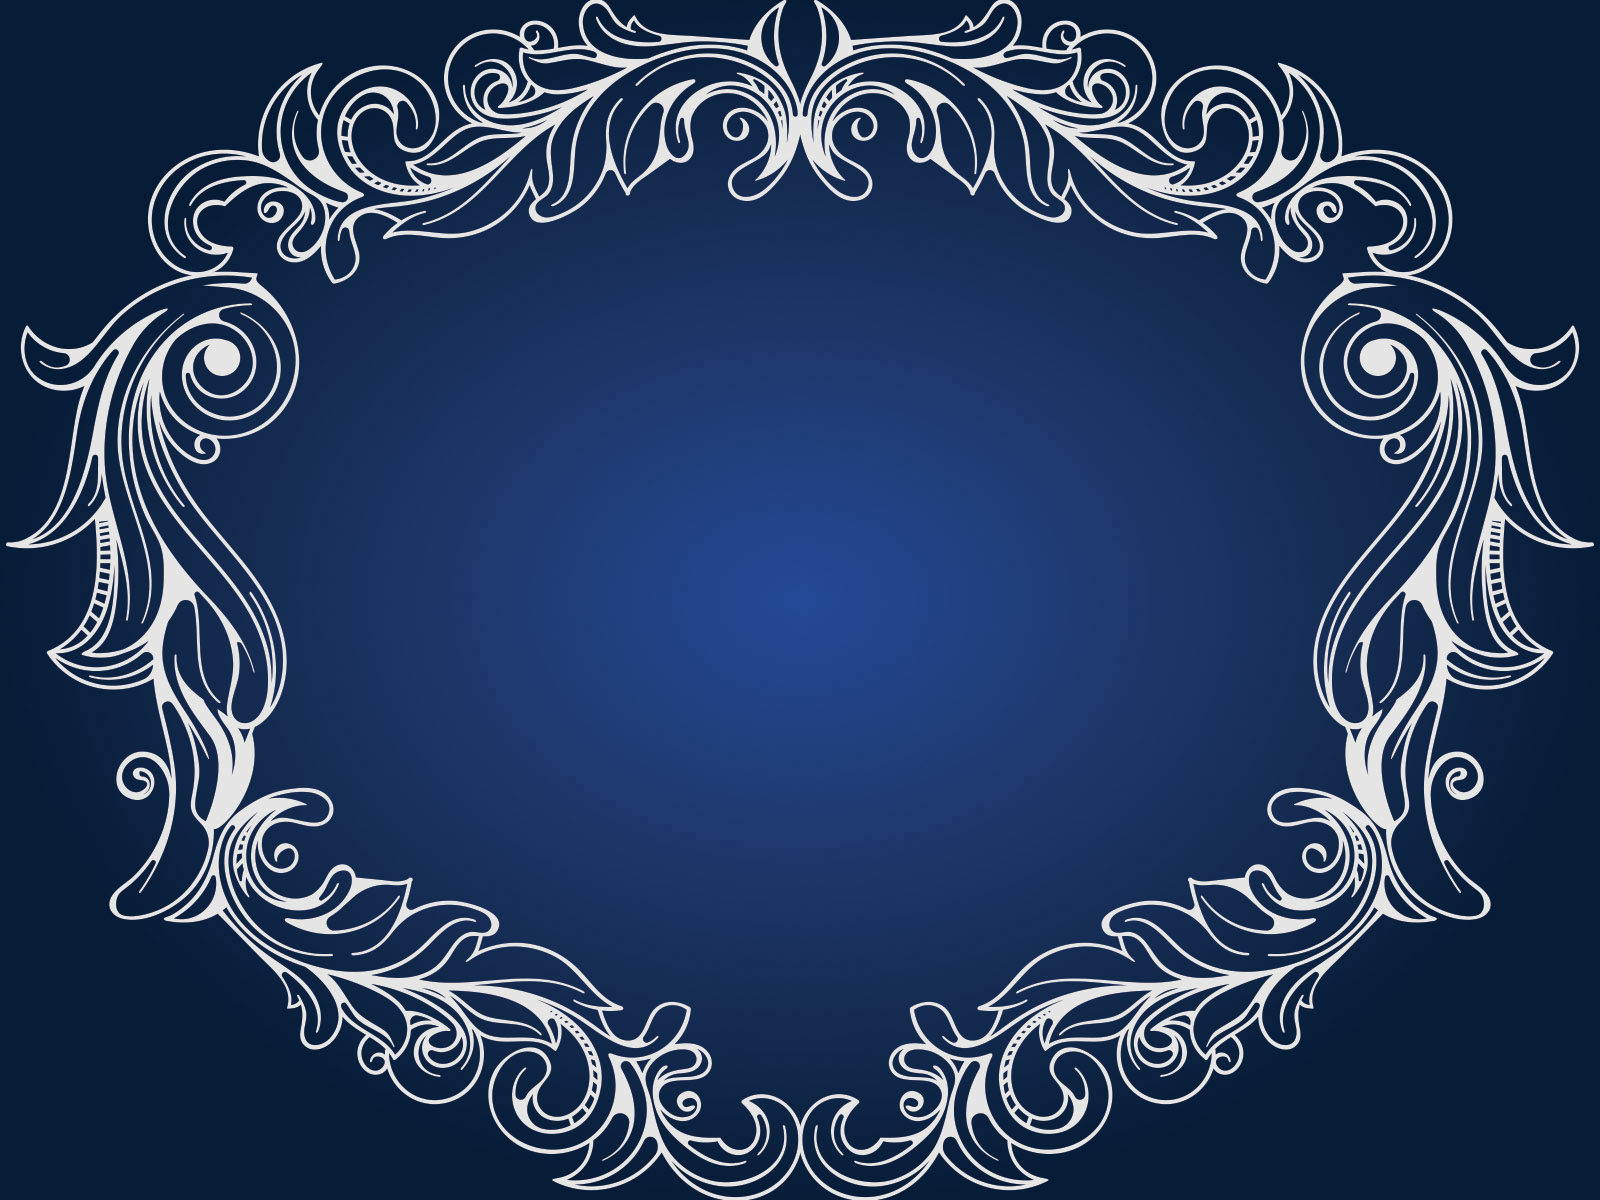 Floral Frame Powerpoint Templates - Blue, Border & Frames - Free PPT  Backgrounds and Templates